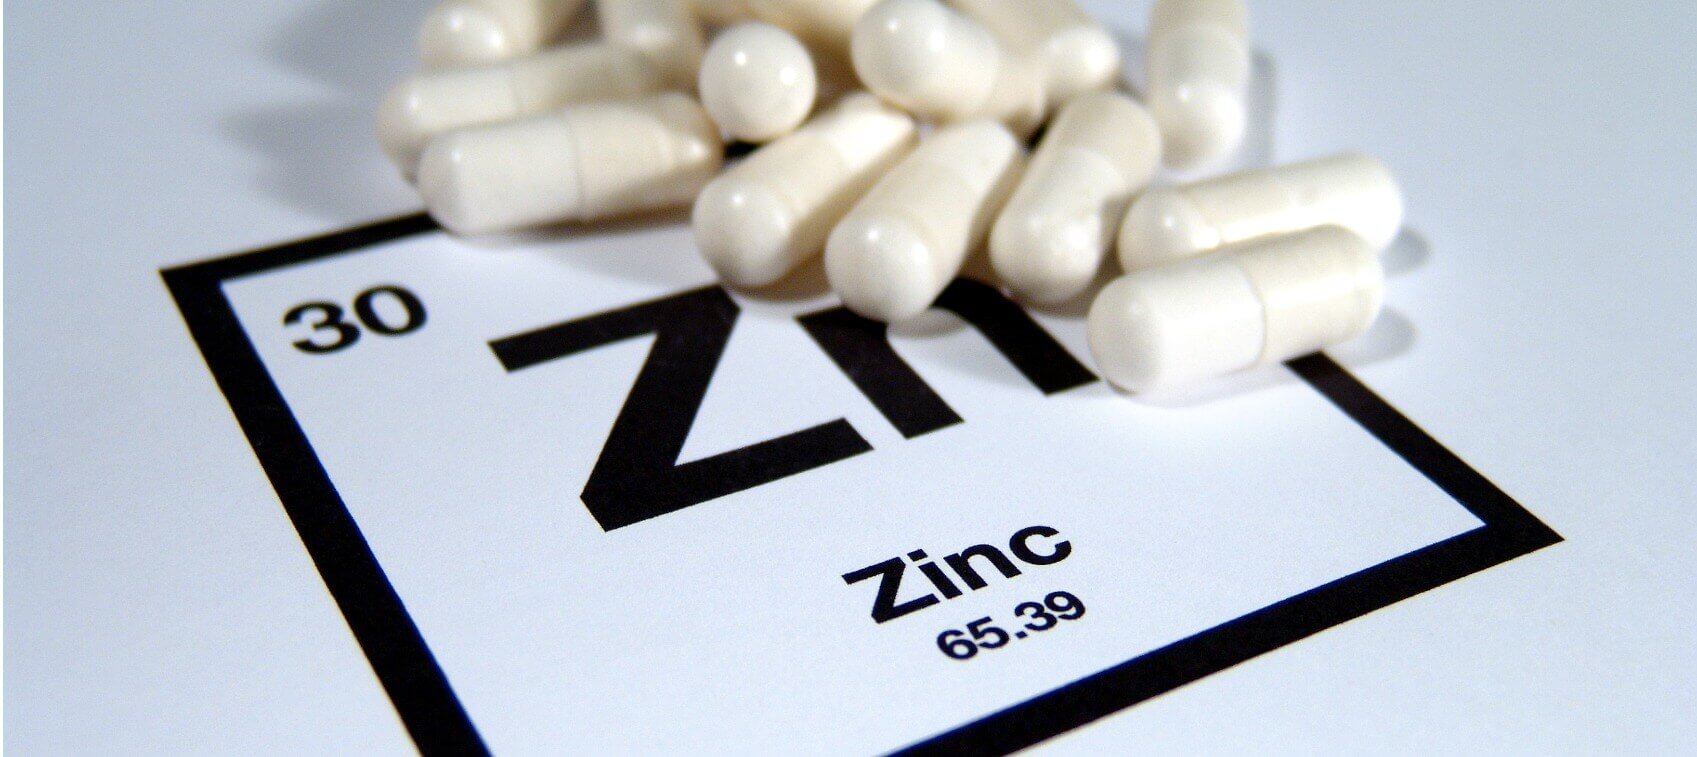 chelated-zinc-vs-zinc-pincolinate-which-is-best-absorbed-healthy